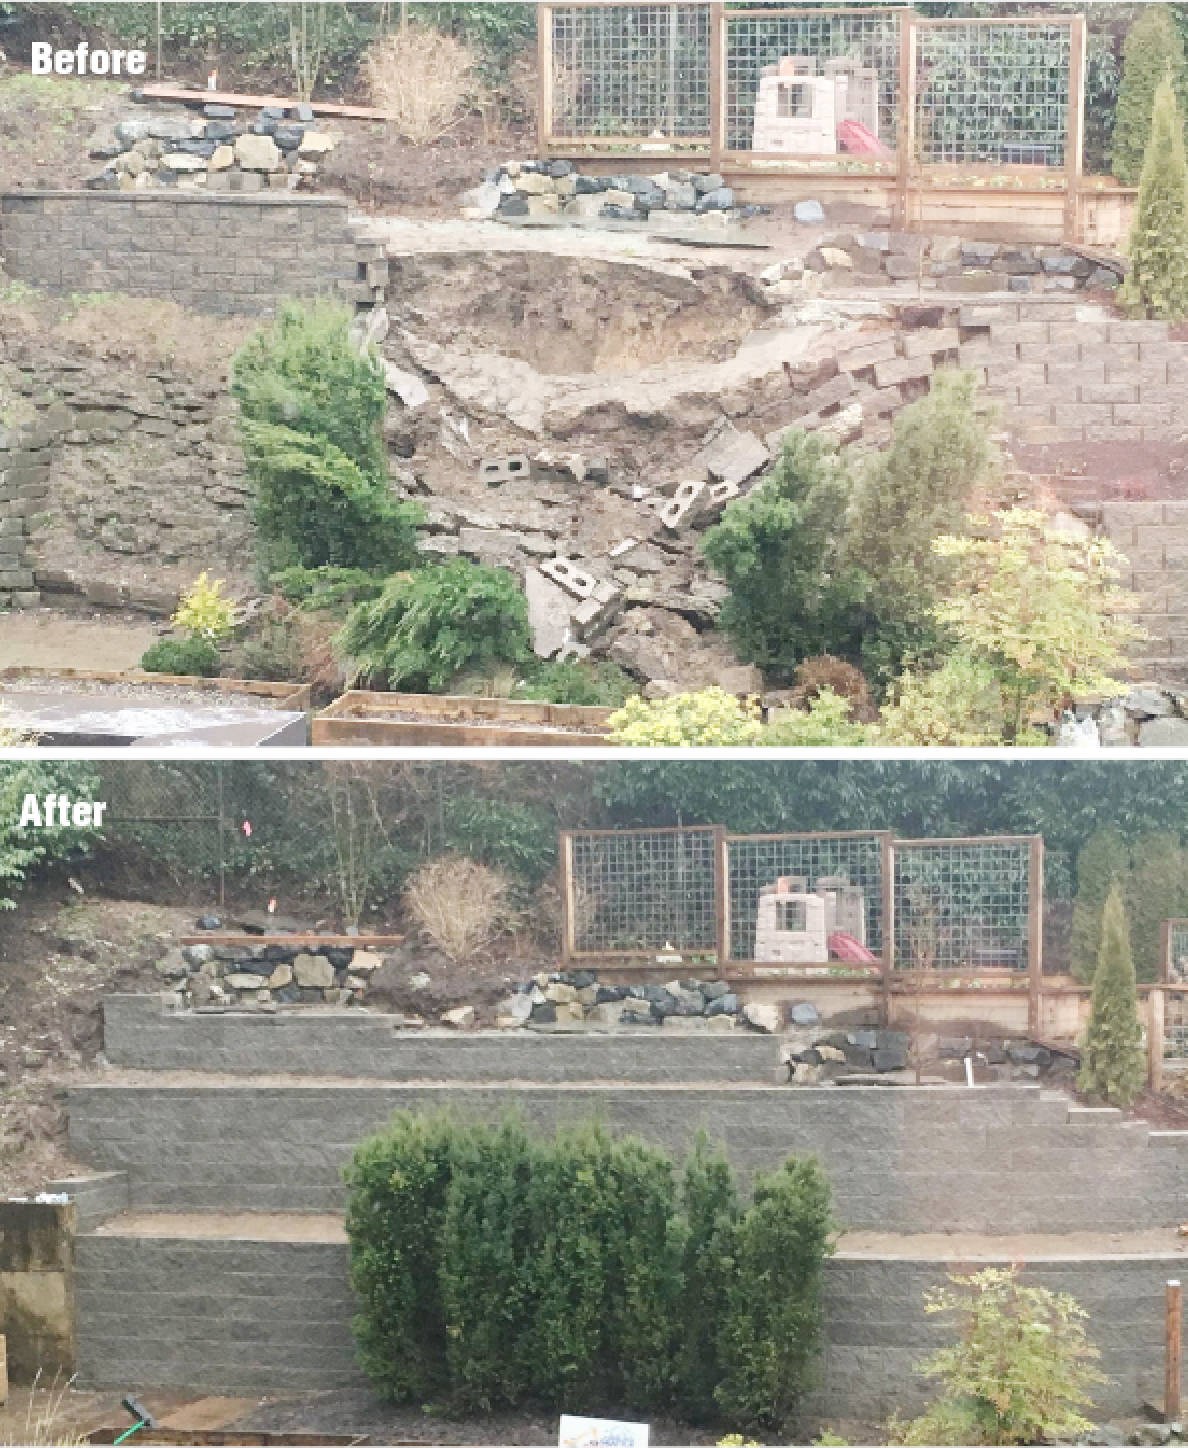 When it comes to crucial features like retaining walls, experience and technical knowledge matter. Seattle Rockeries was called in to properly rebuild when this retaining wall failed.